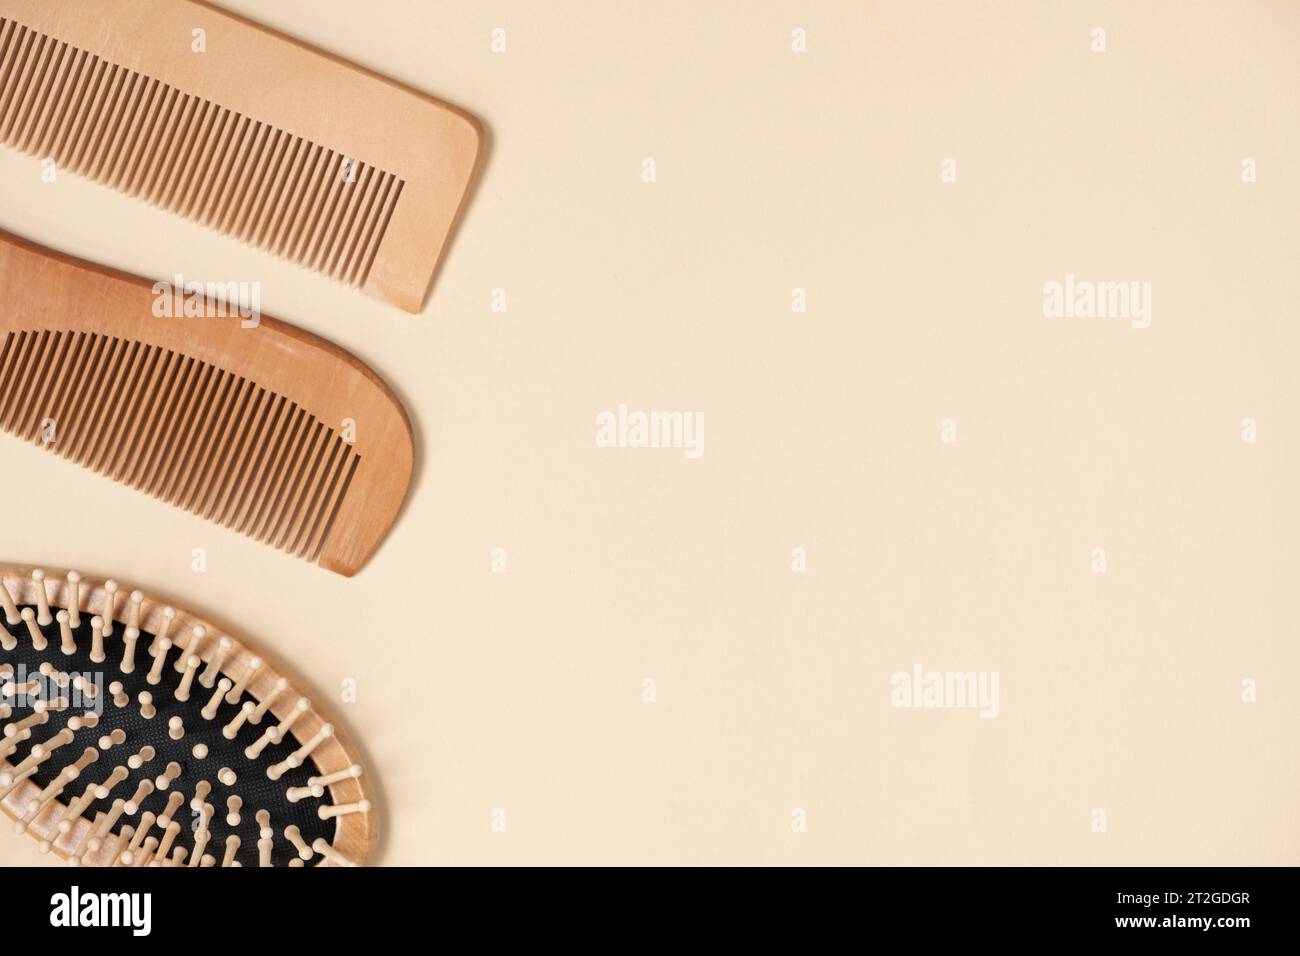 Wooden combs and hair care brush on beige background, top view, space for text. Stock Photo